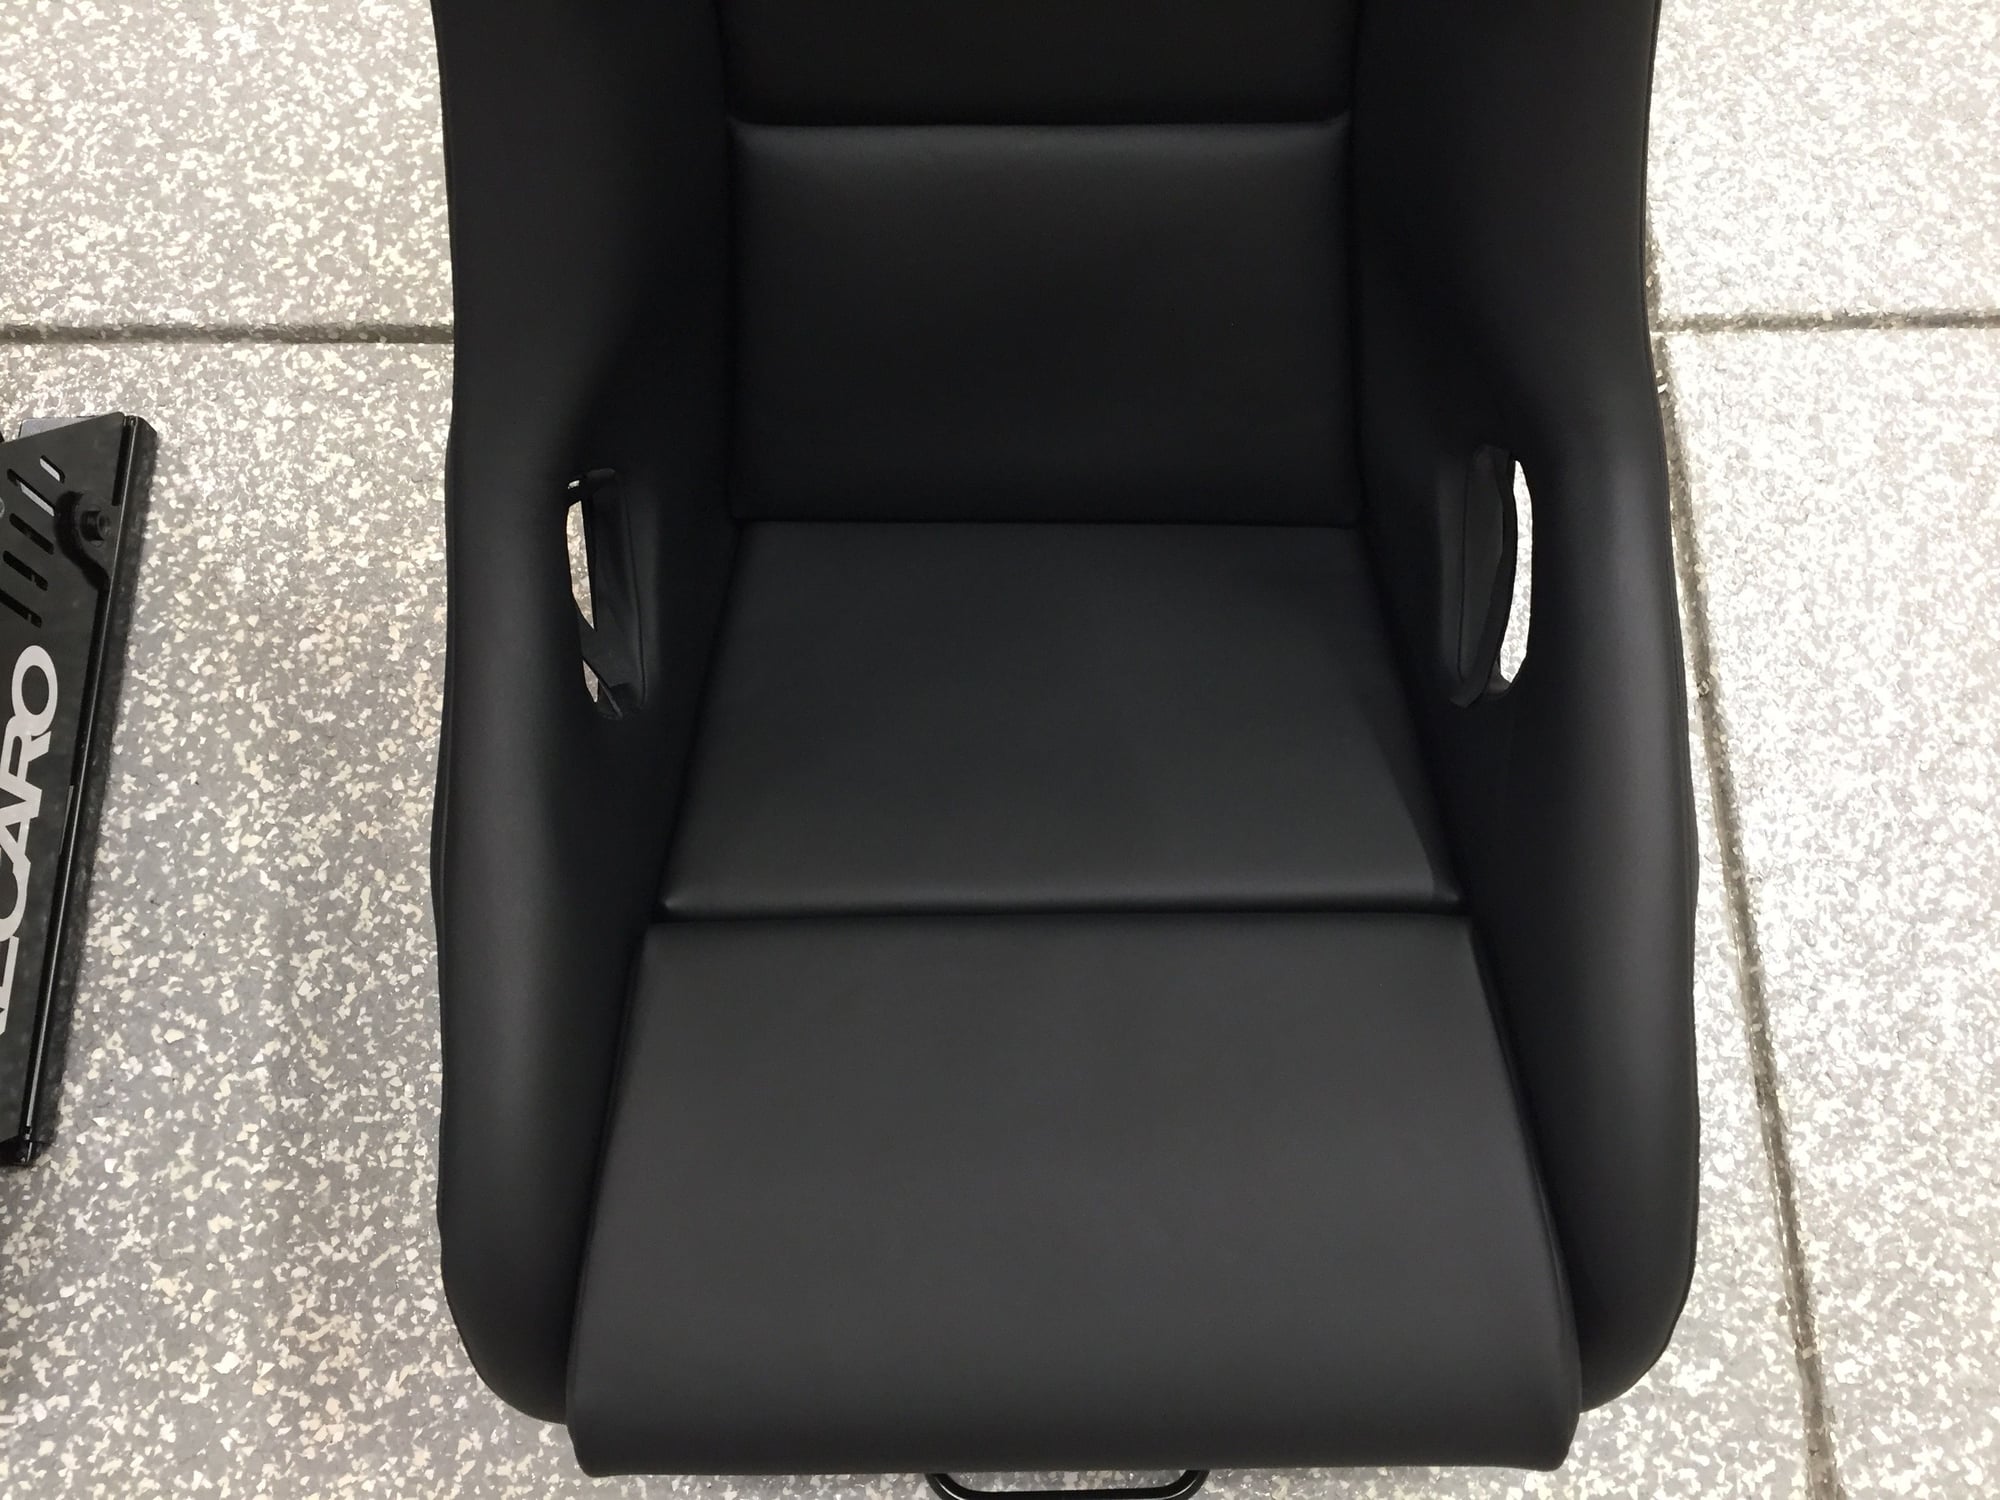 Interior/Upholstery - RECARO POLE POSITION ABE SEAT SET / GENUINE LEATHER WITH SIDE MOUNTS AND SLIDERS - Used - 1989 to 1998 Porsche 911 - Los Angeles, CA 91344, United States